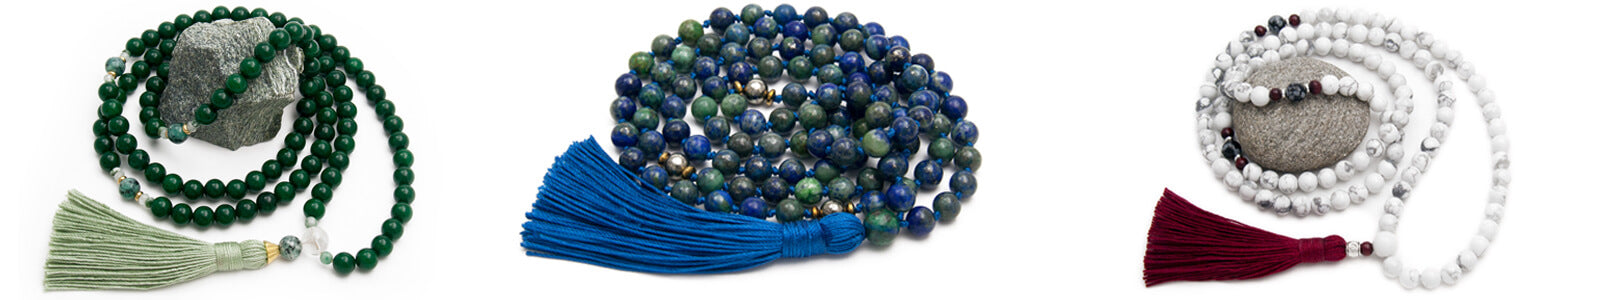 Mala Beads for Meditation - How to Choose, Use, and Cleanse the Mala Beads